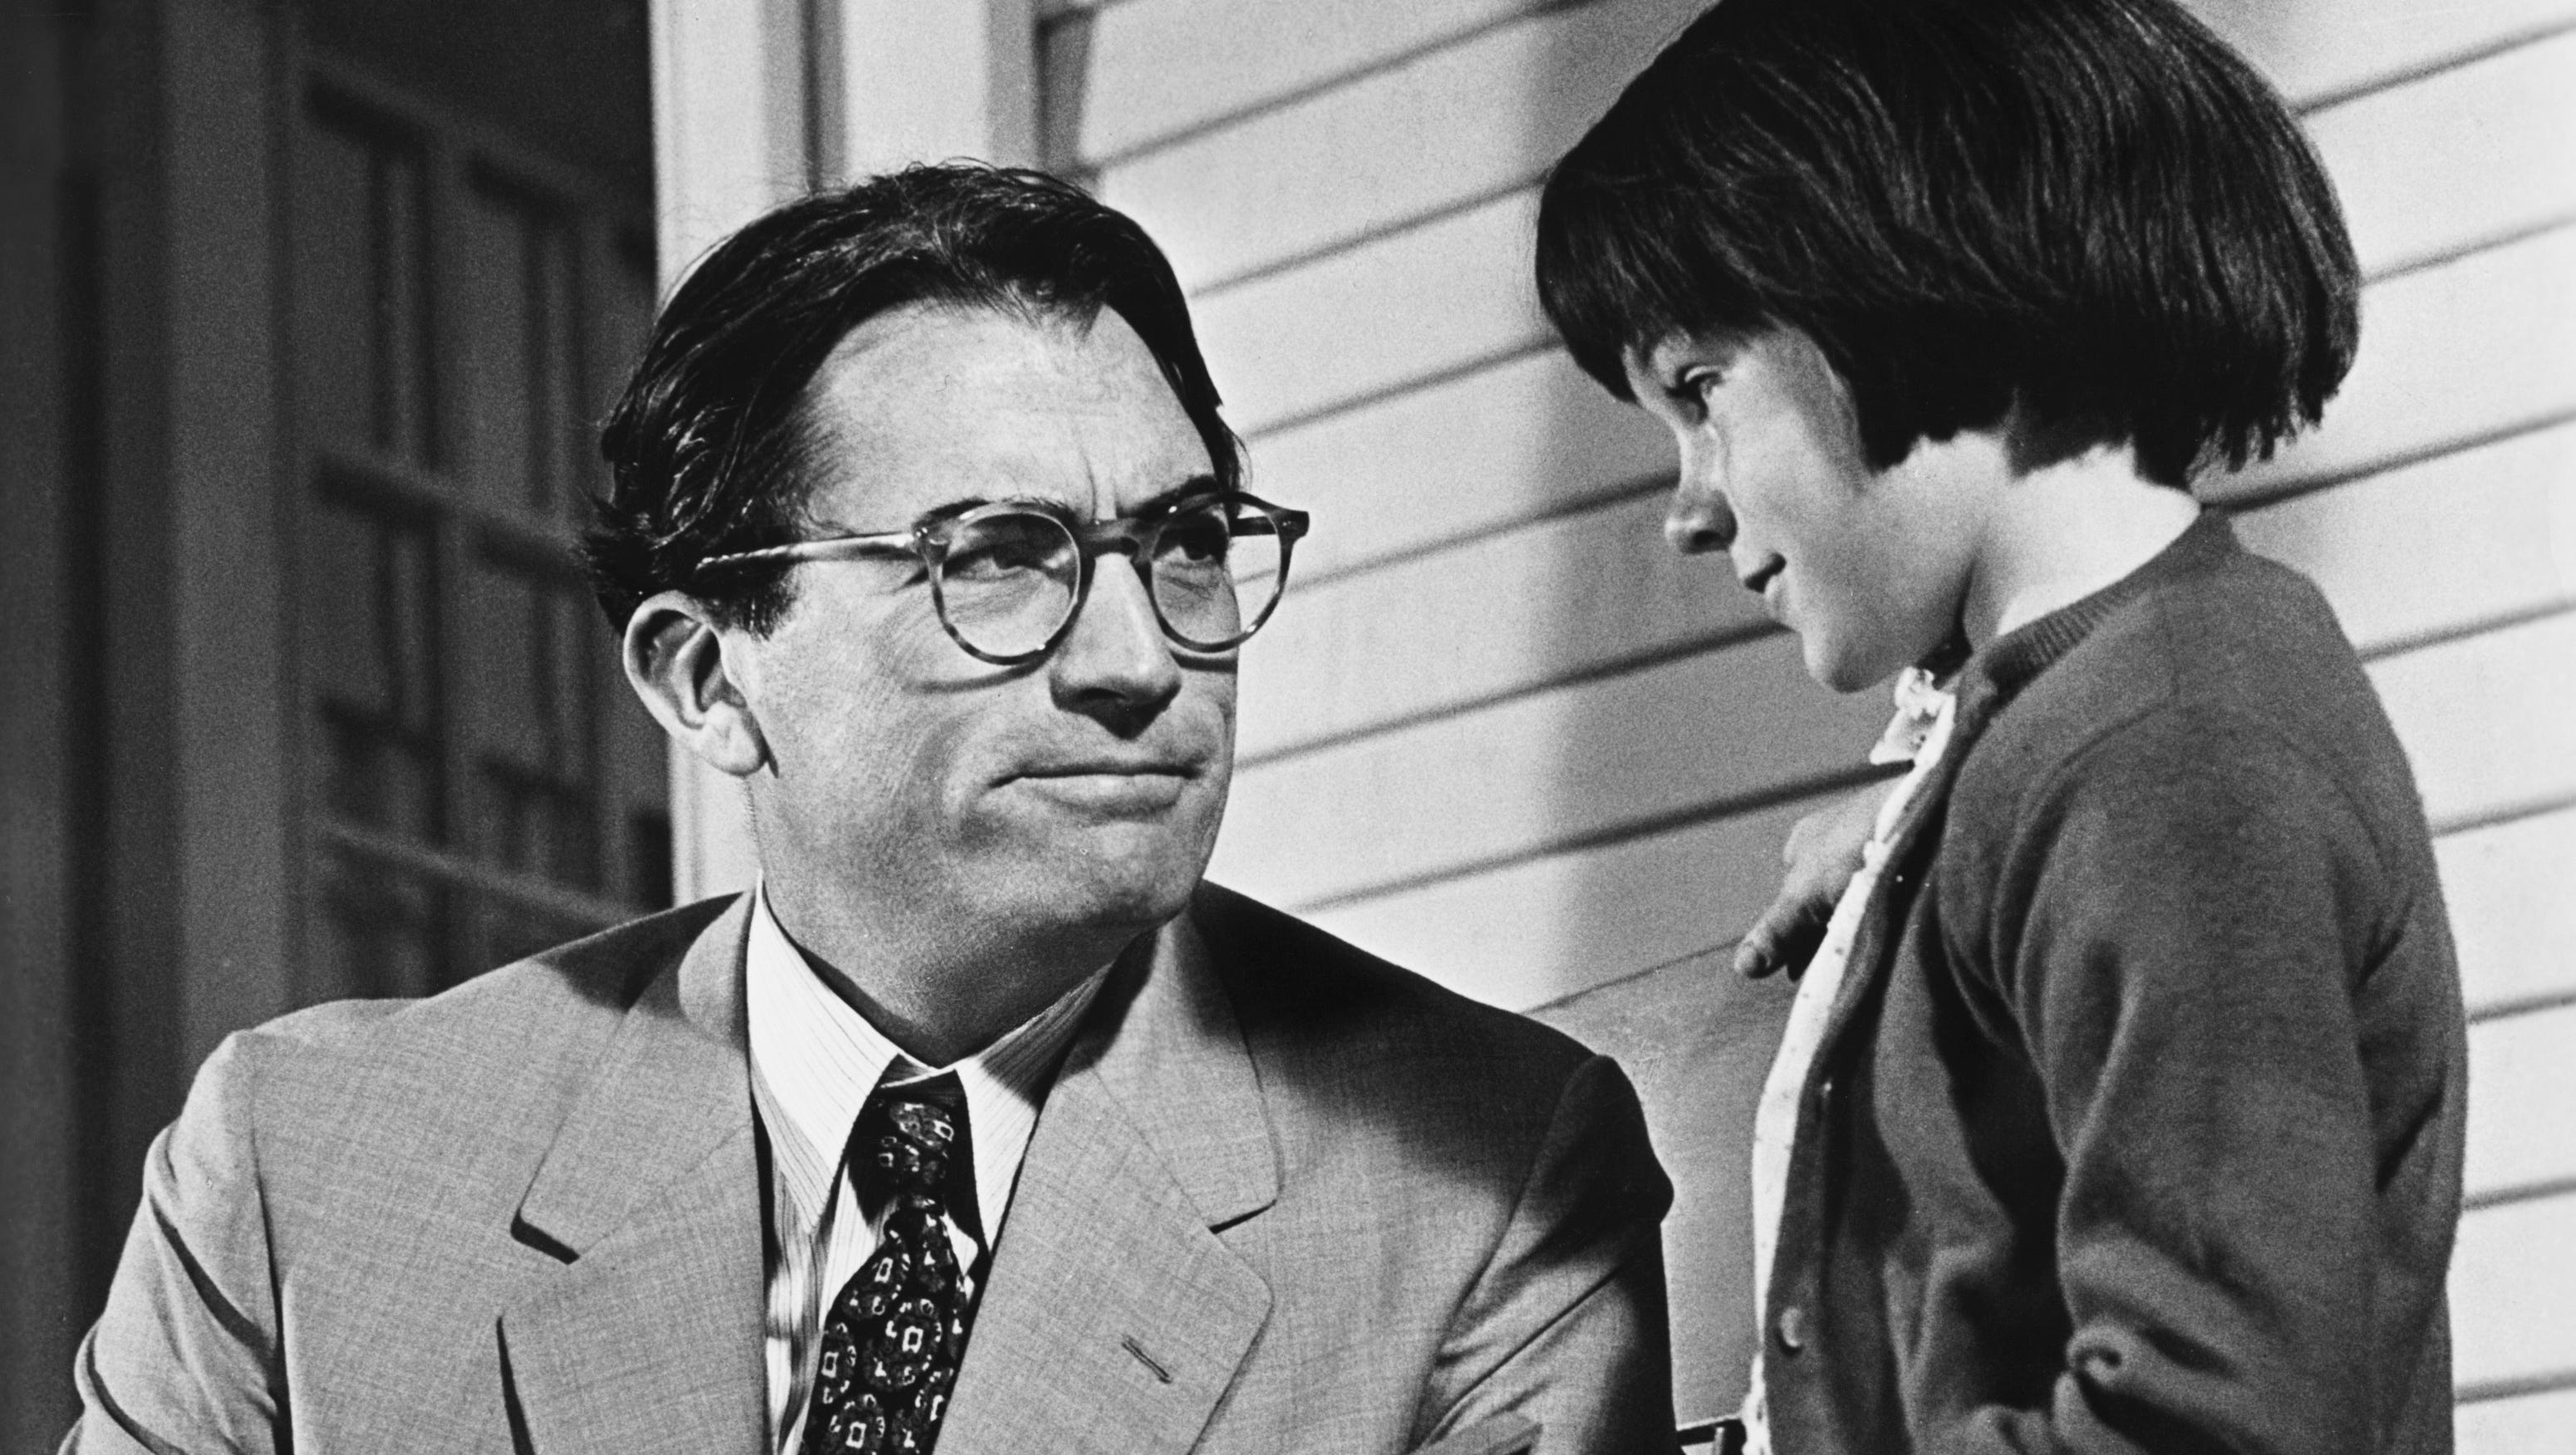 Books Reflect On Why To Kill A Mockingbird Atticus Finch Matter